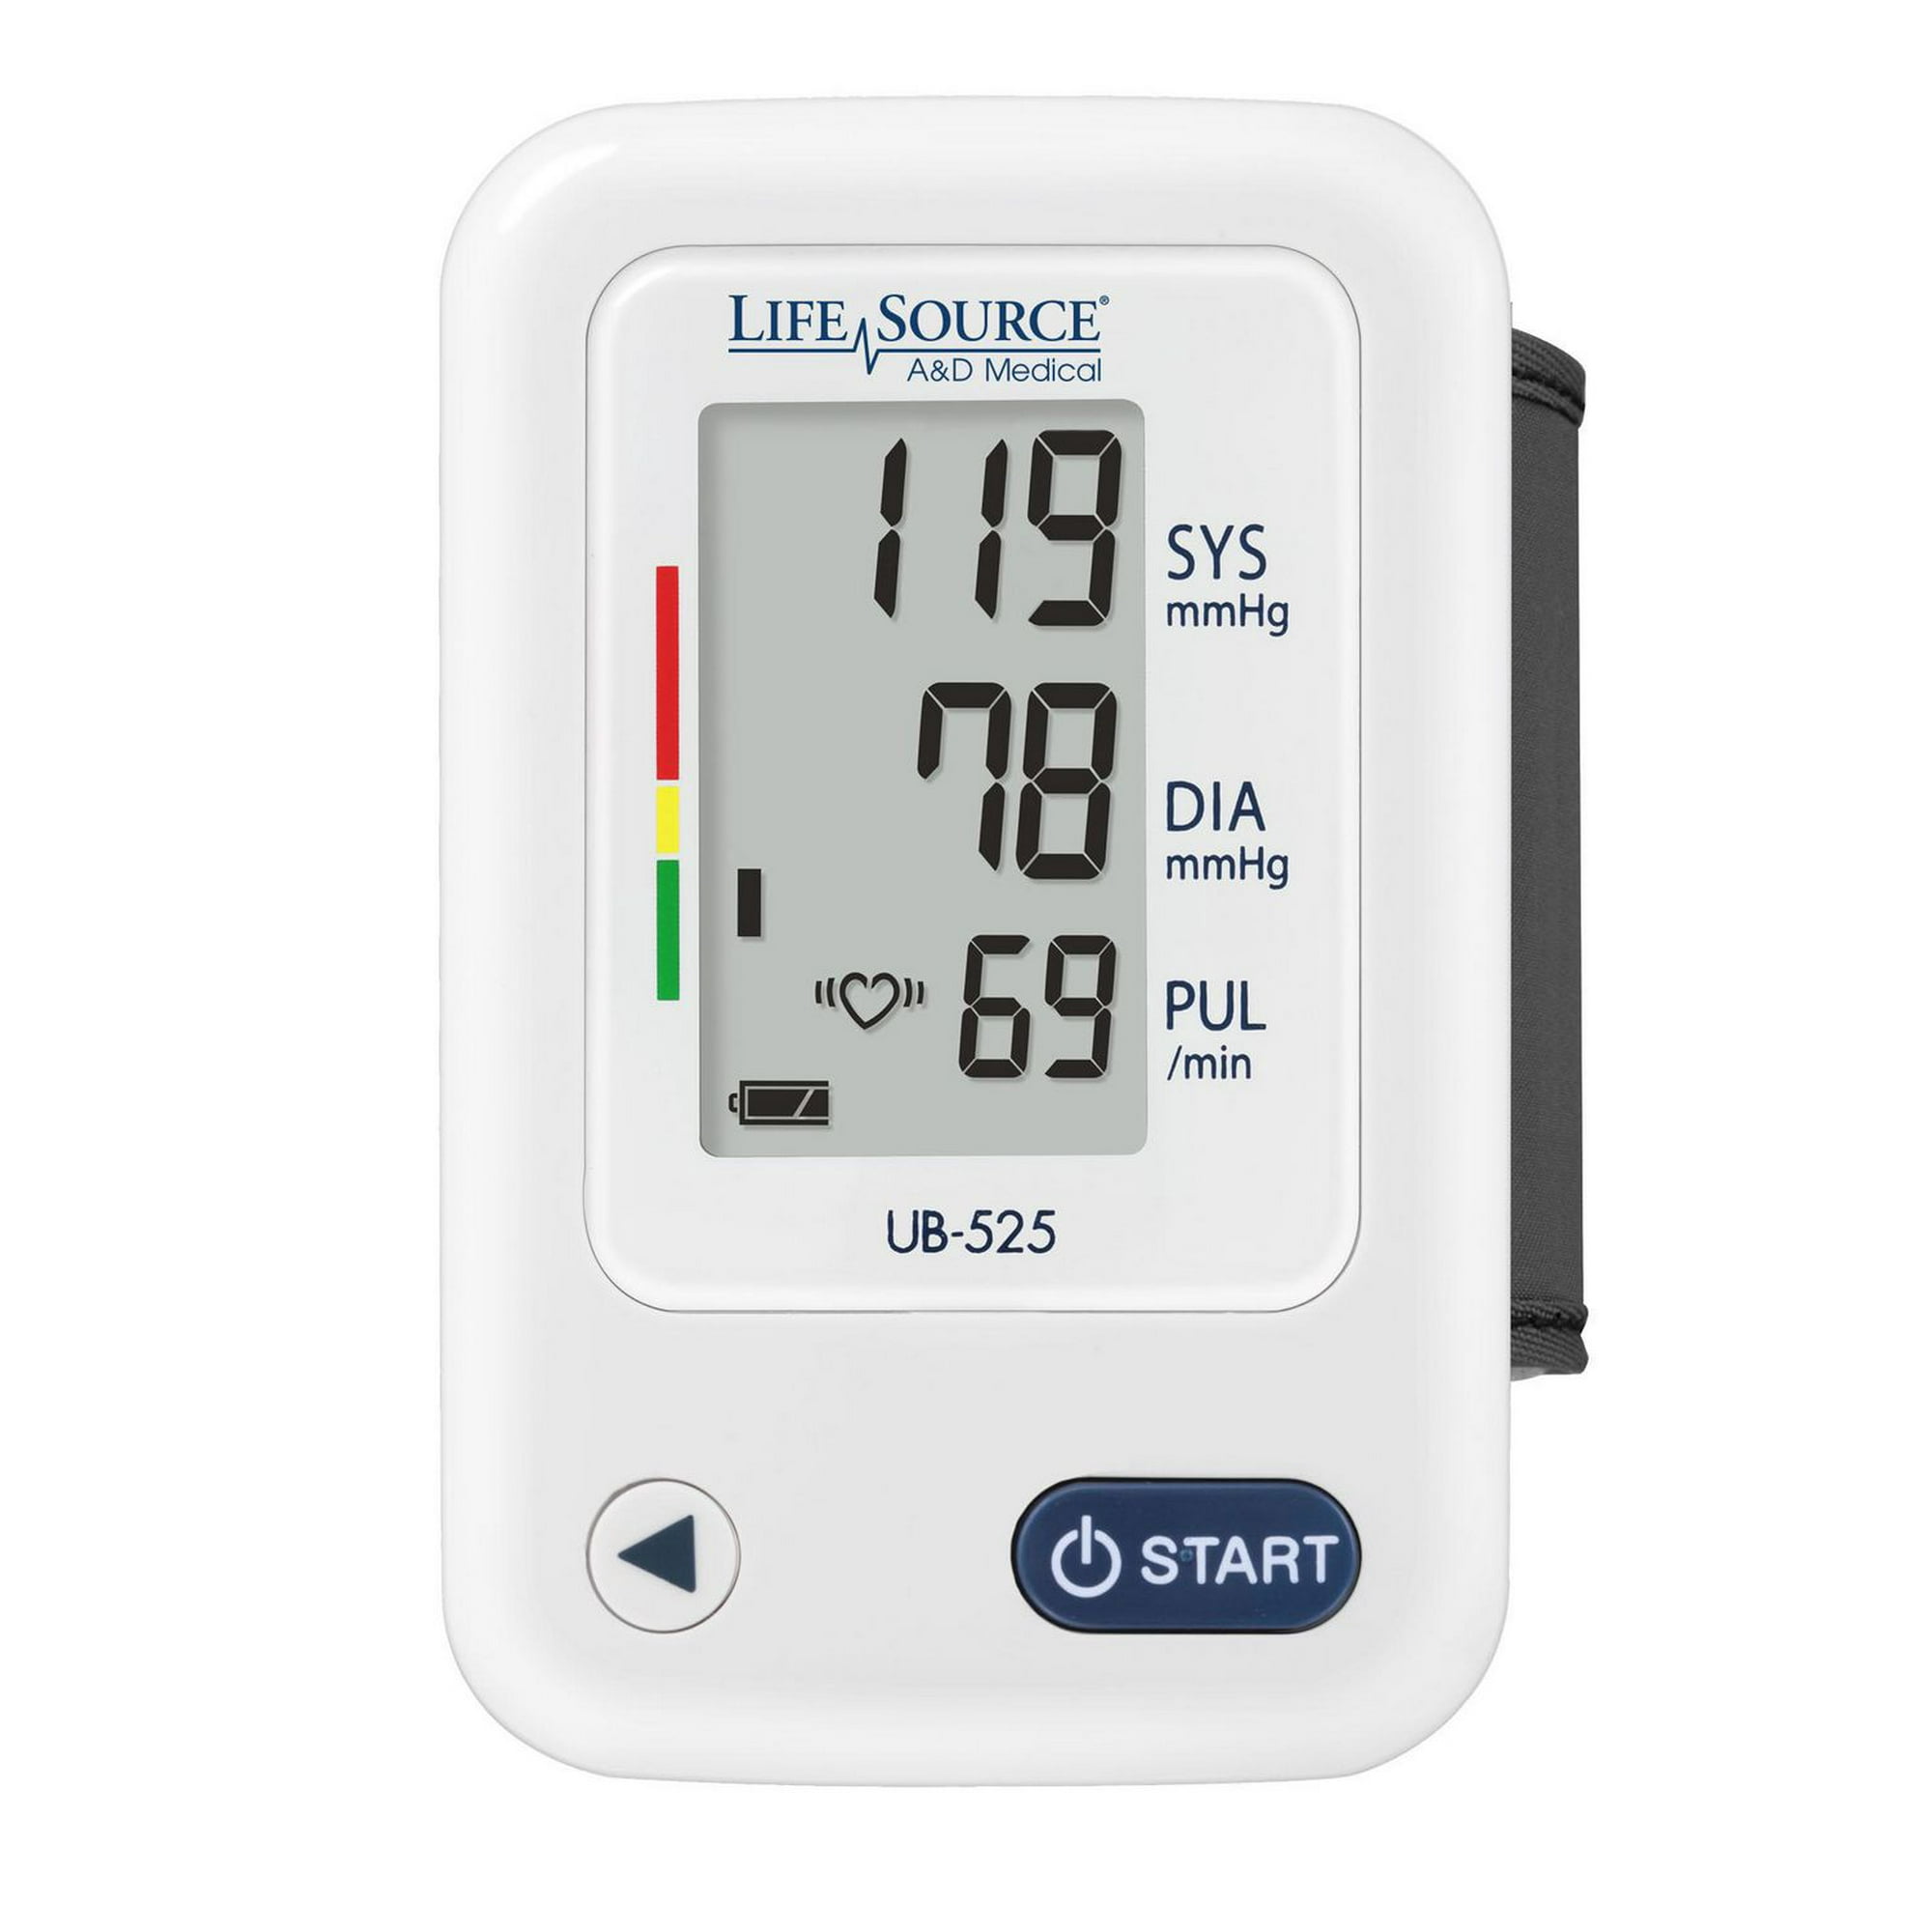 LifeSource Essential Wrist BP Monitor UB-525, Clinically validated